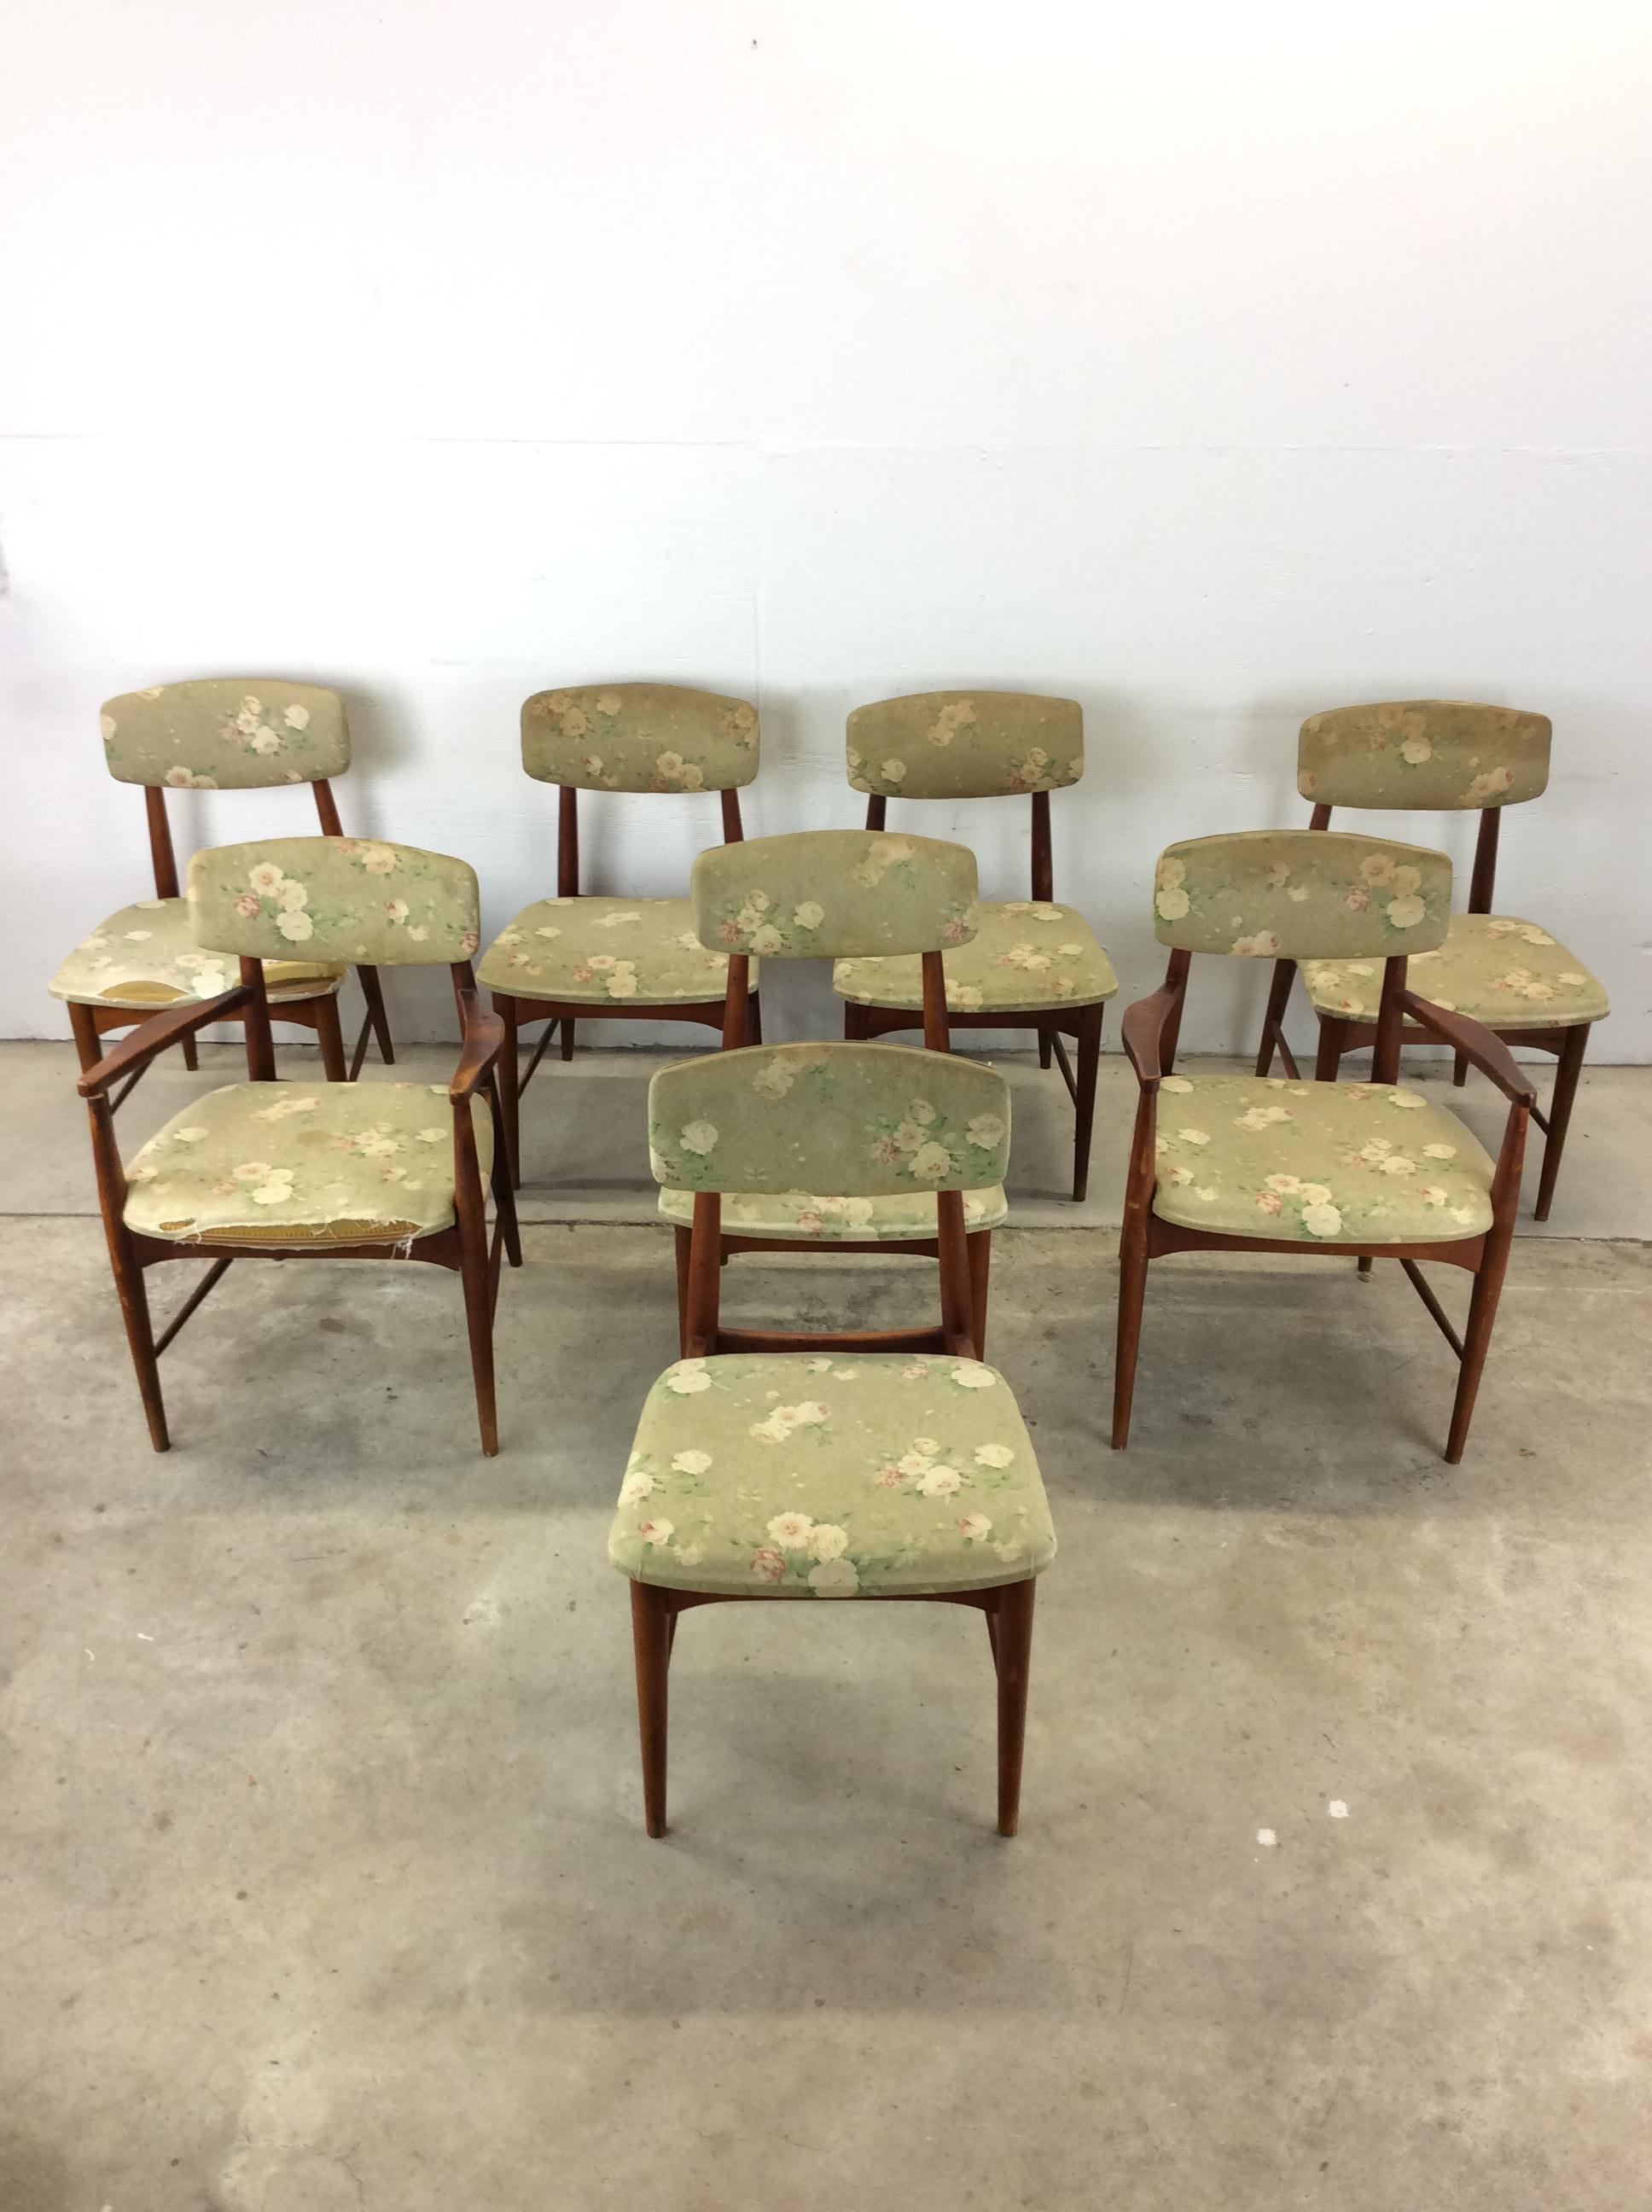 20th Century Set of 8 Mid Century Modern Dining Room Chairs with Vintage Upholstery For Sale